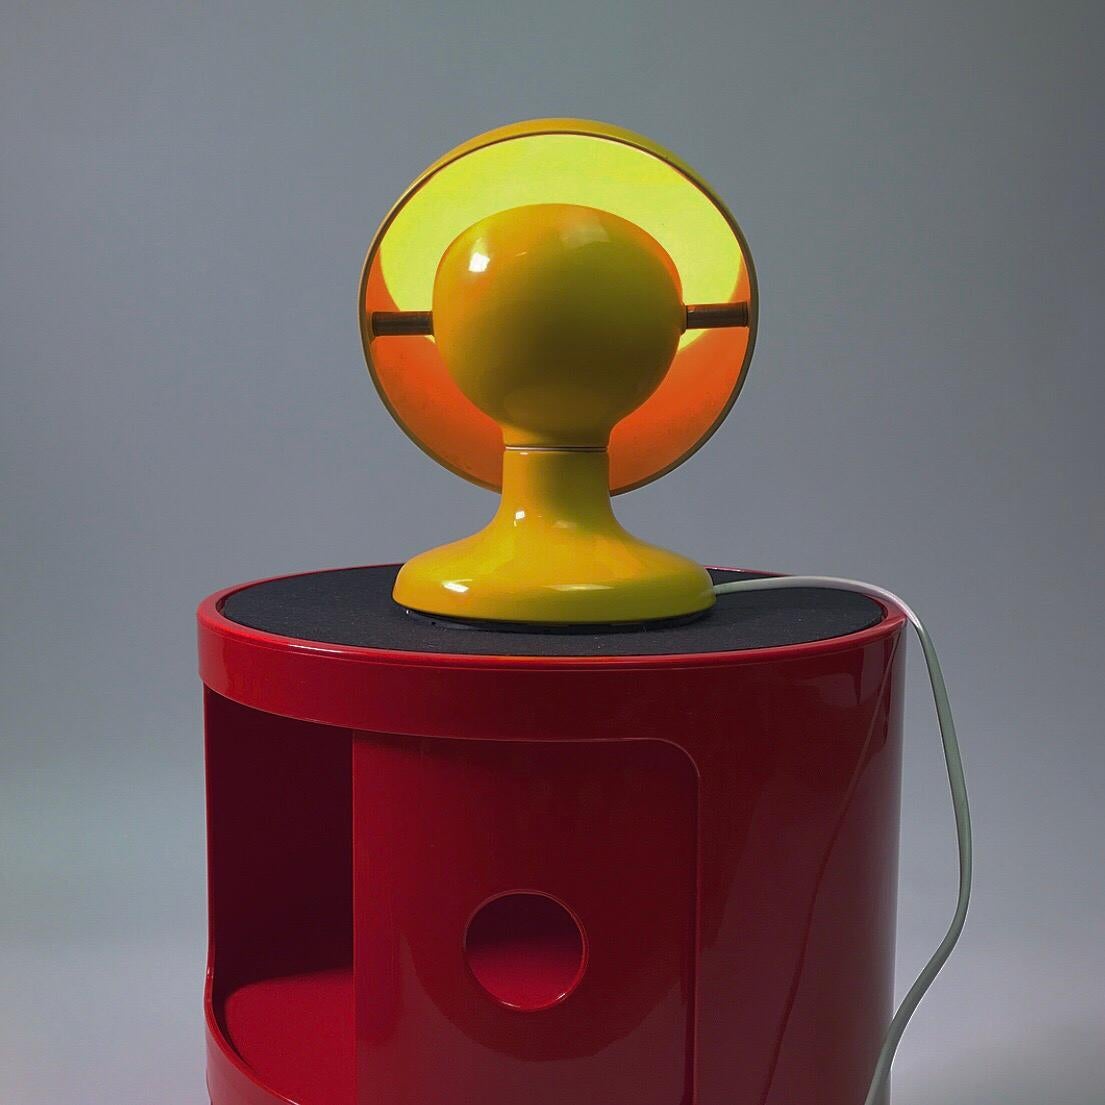 Lacquer Jucker table lamp by Tobia Scarpa for Flos, Italy, 1962